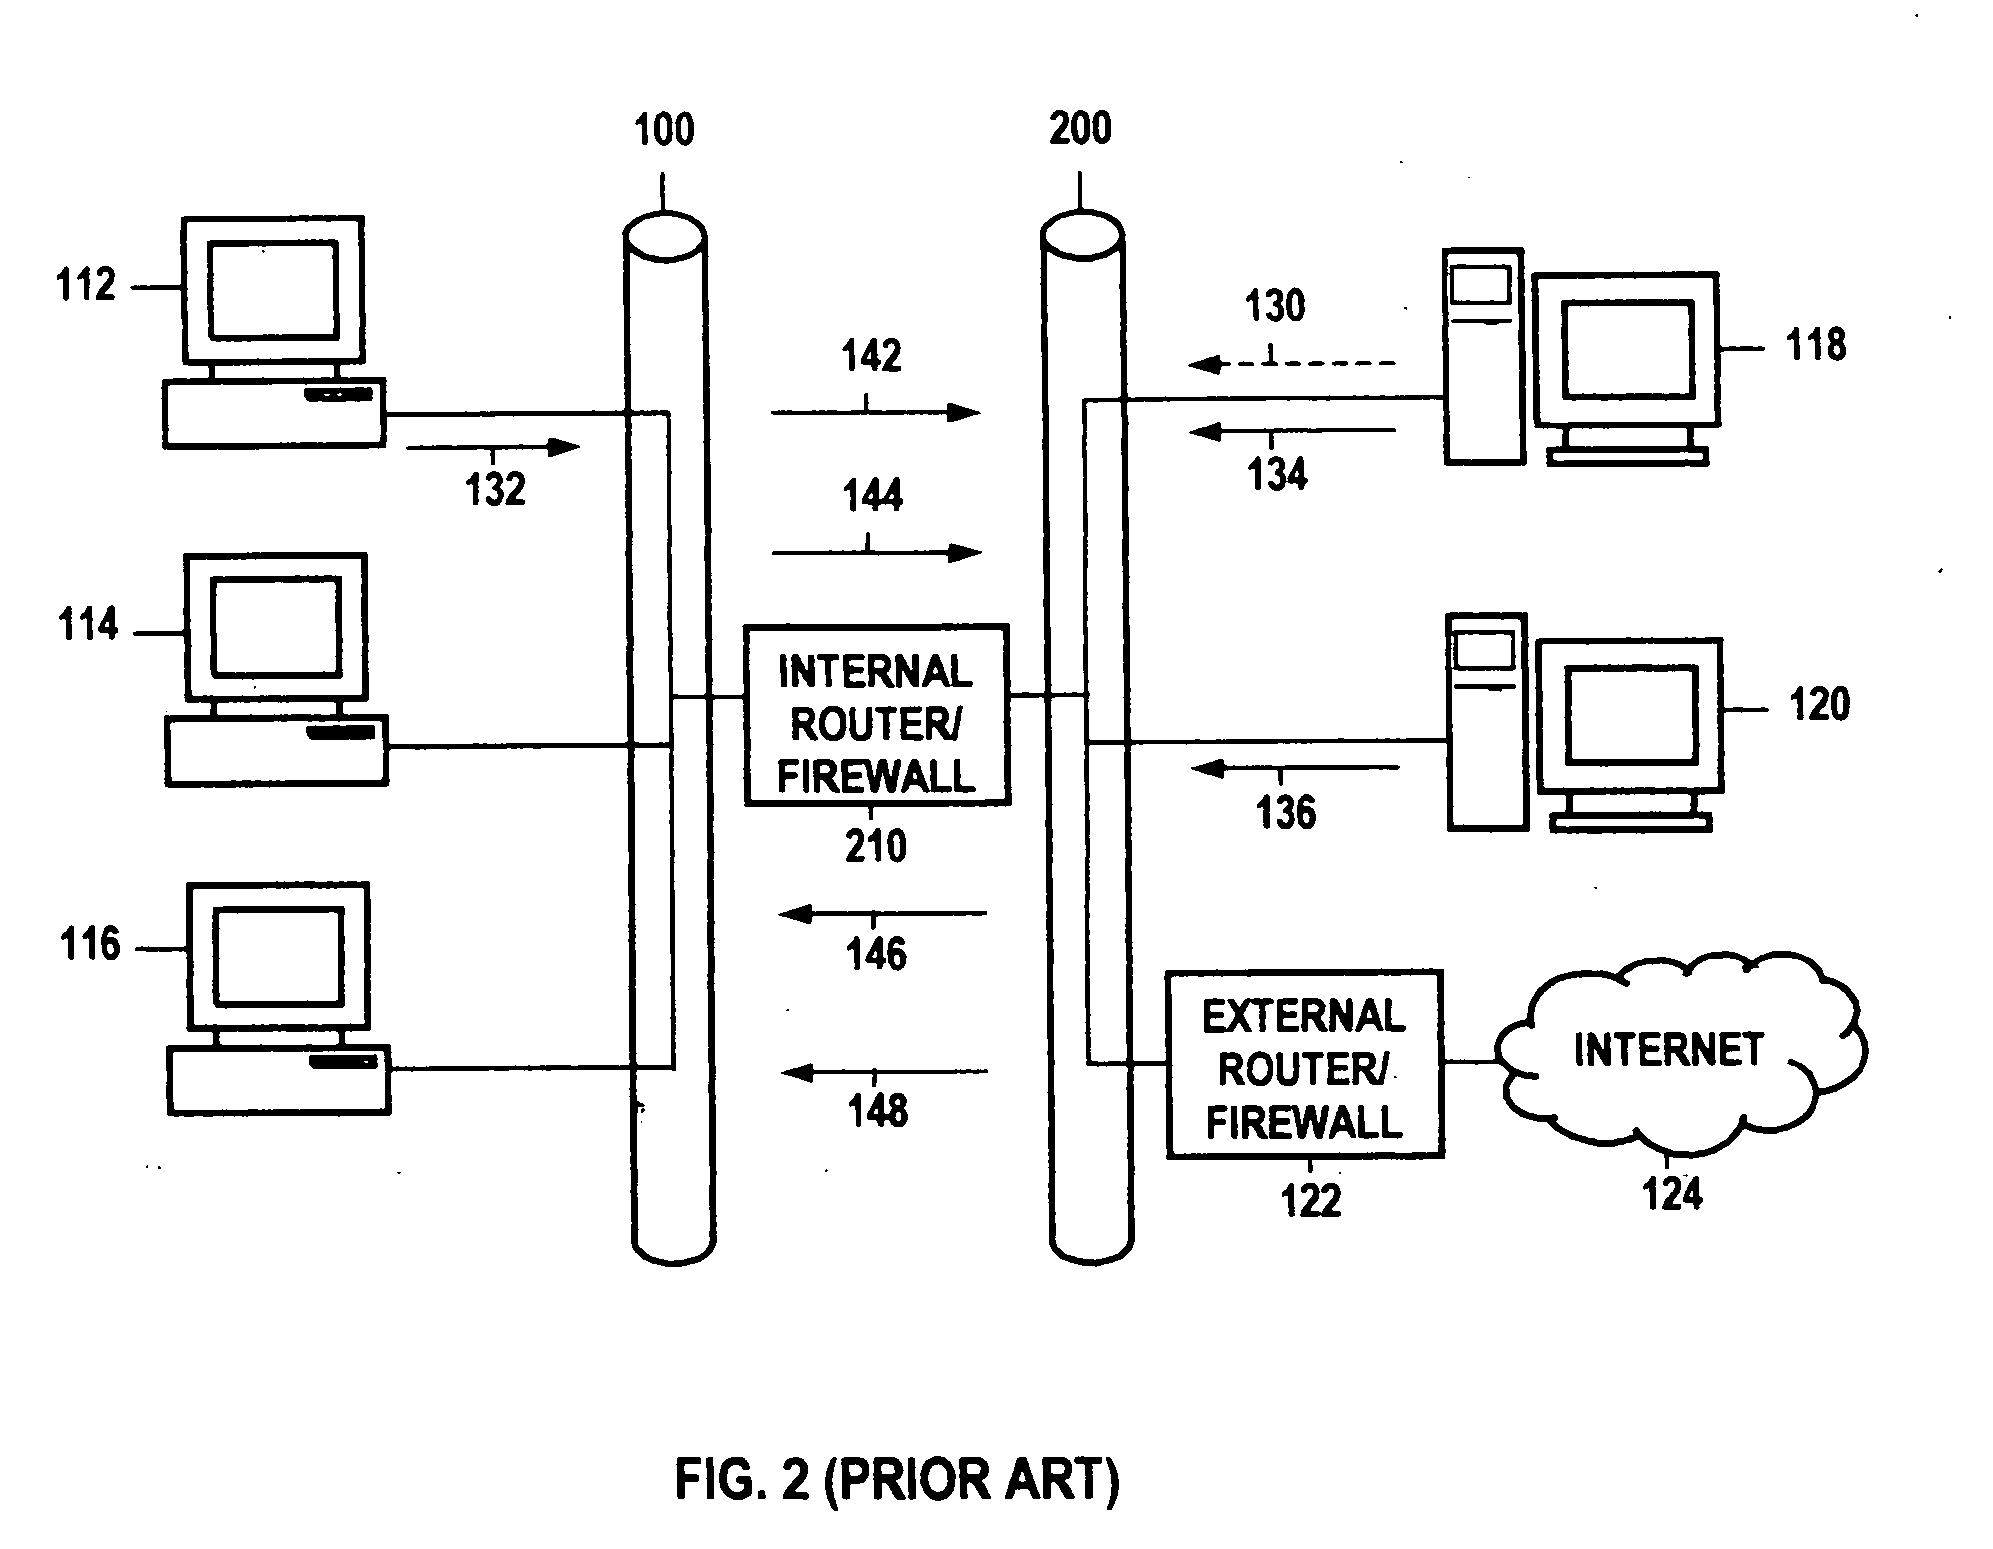 Method and system for remotely booting a computer device using a peer device